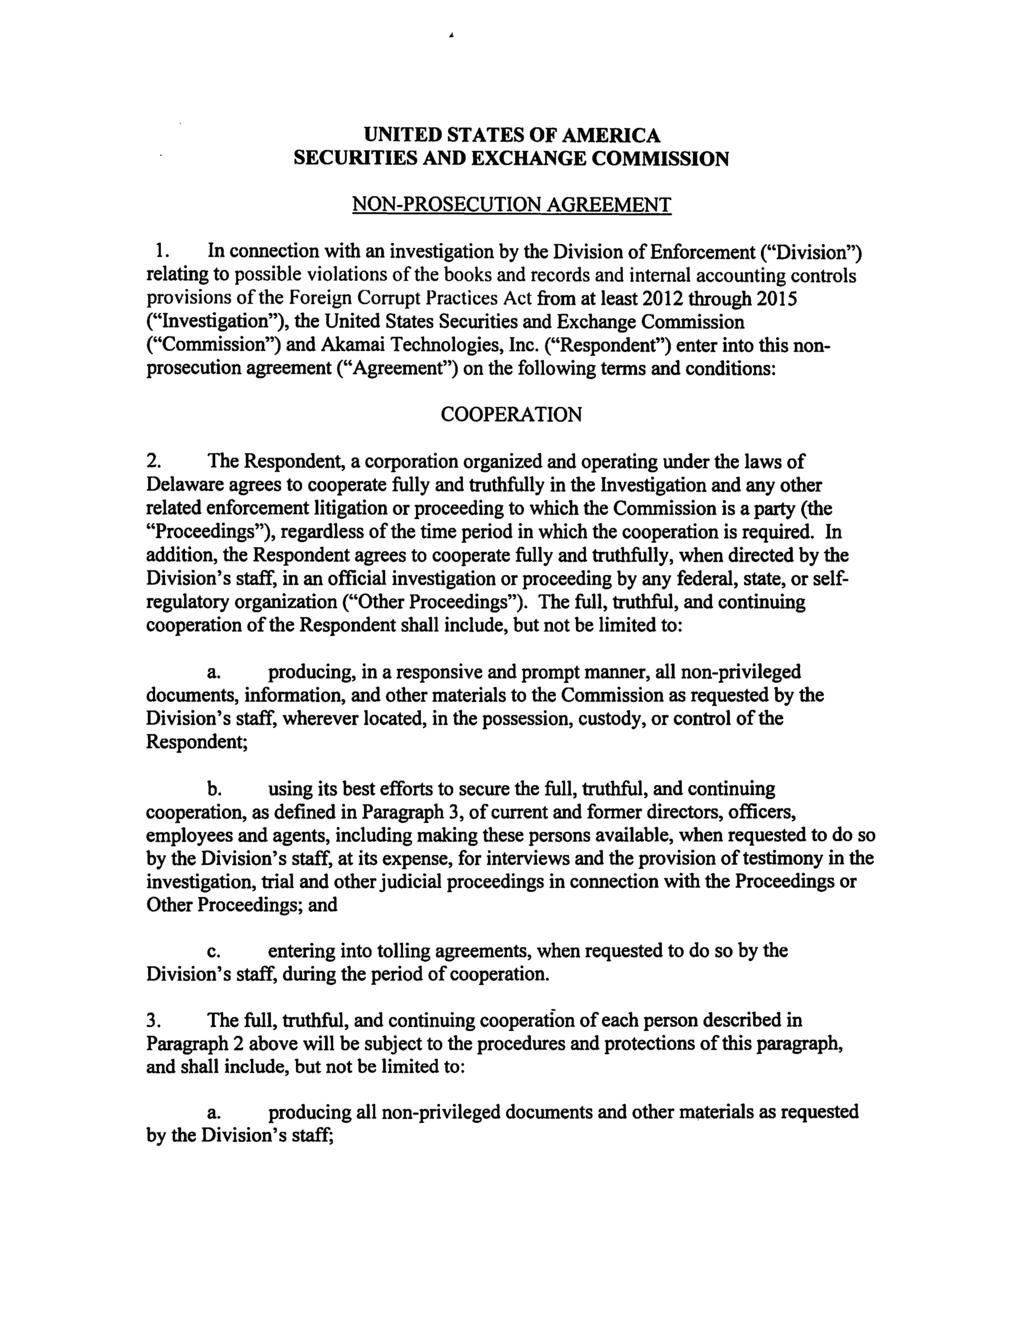 UNITED STATES OF AMERICA SECURITIES AND EXCHANGE COMMISSION NON-PROSECUTION AGREEMENT 1.